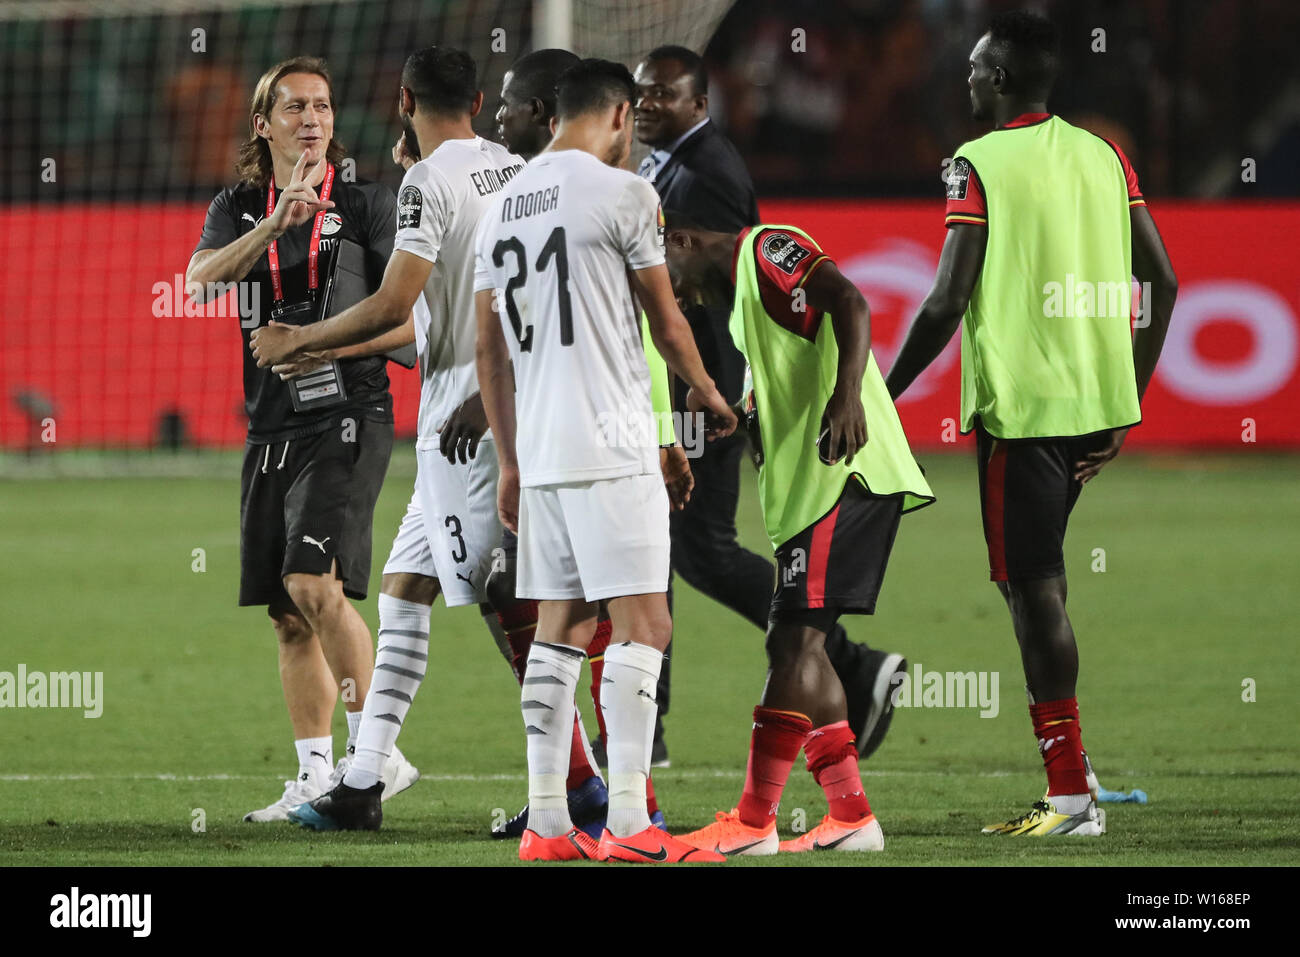 Cairo, Egypt. 30th June, 2019. Egypt assistant coach Michel Salgado greets players after the final whistle of the 2019 Africa Cup of Nations Group A soccer match between Egypt and Uganda at Cairo International Stadium. Credit: Omar Zoheiry/dpa/Alamy Live News Stock Photo